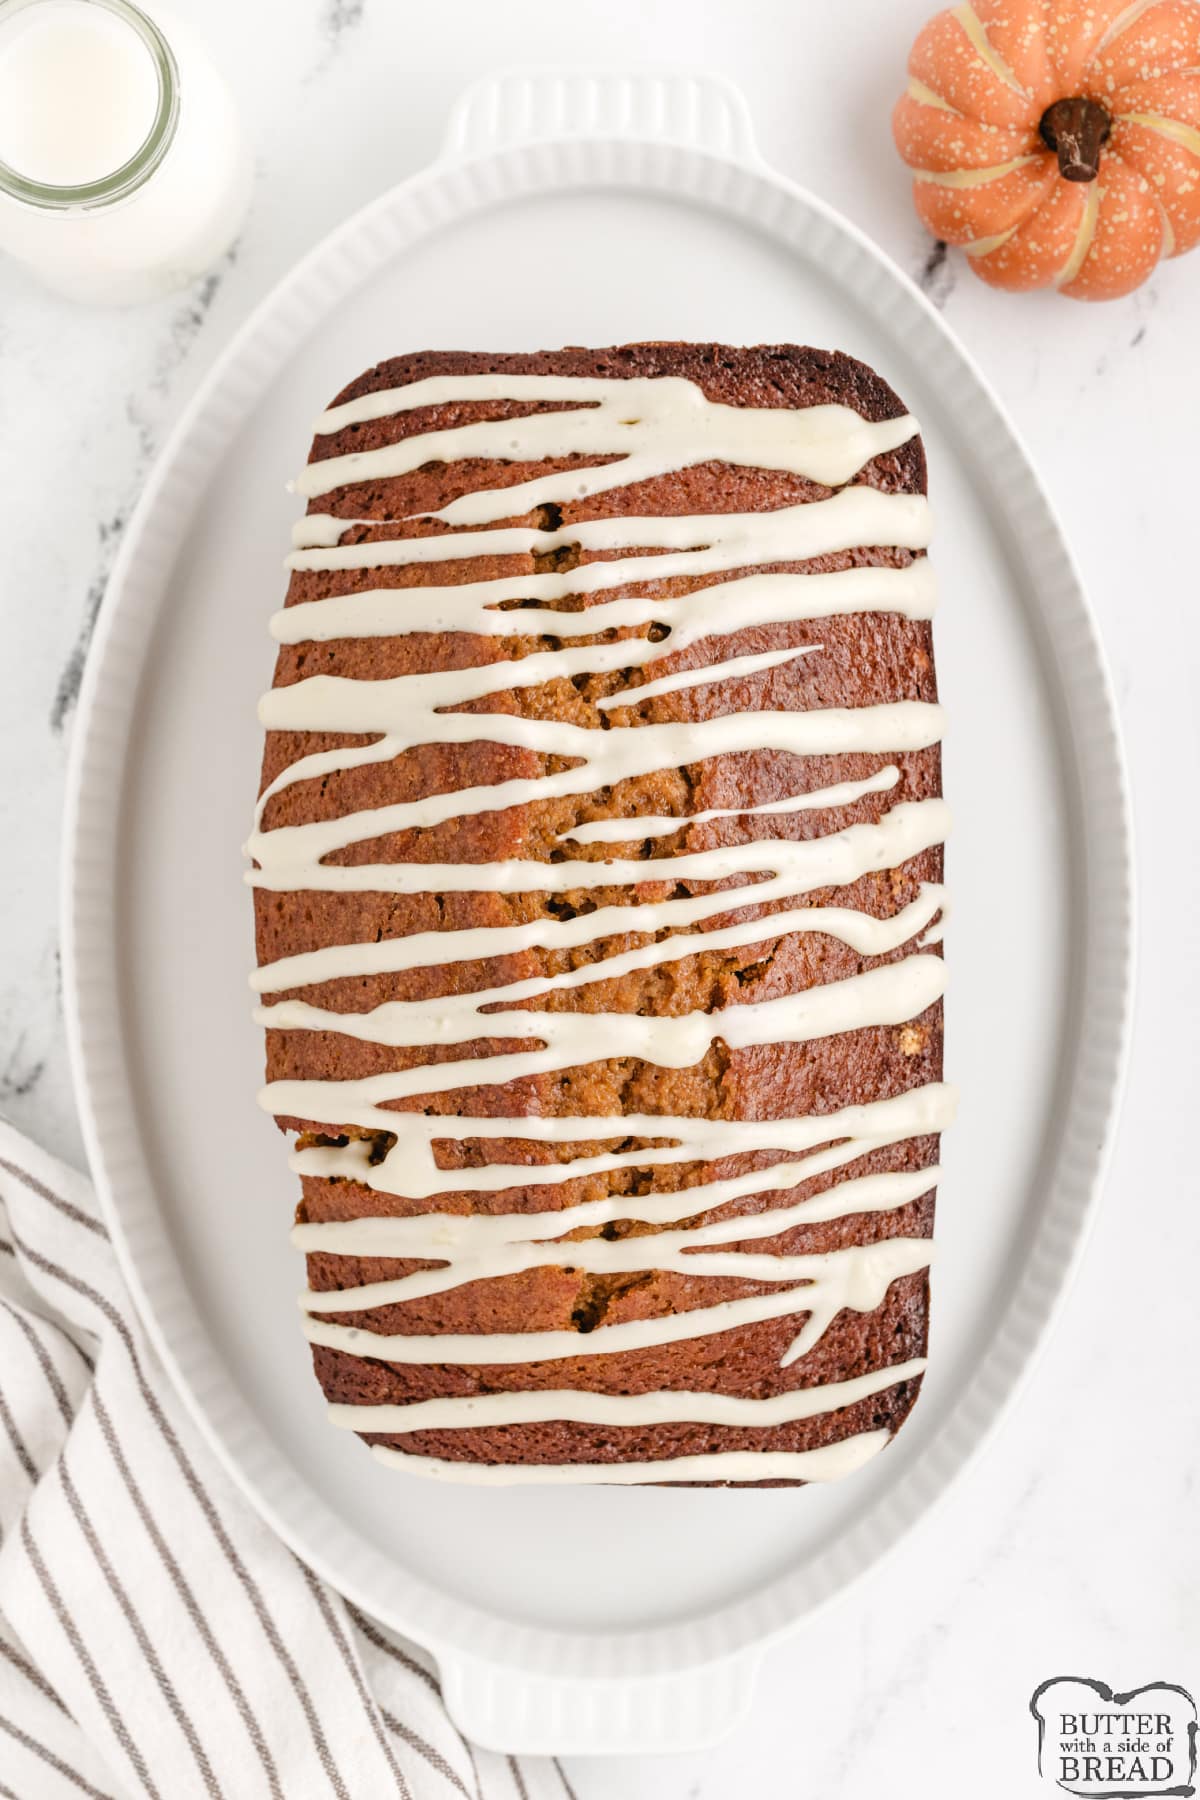 Loaf of pumpkin bread with cream cheese glaze drizzled on top.